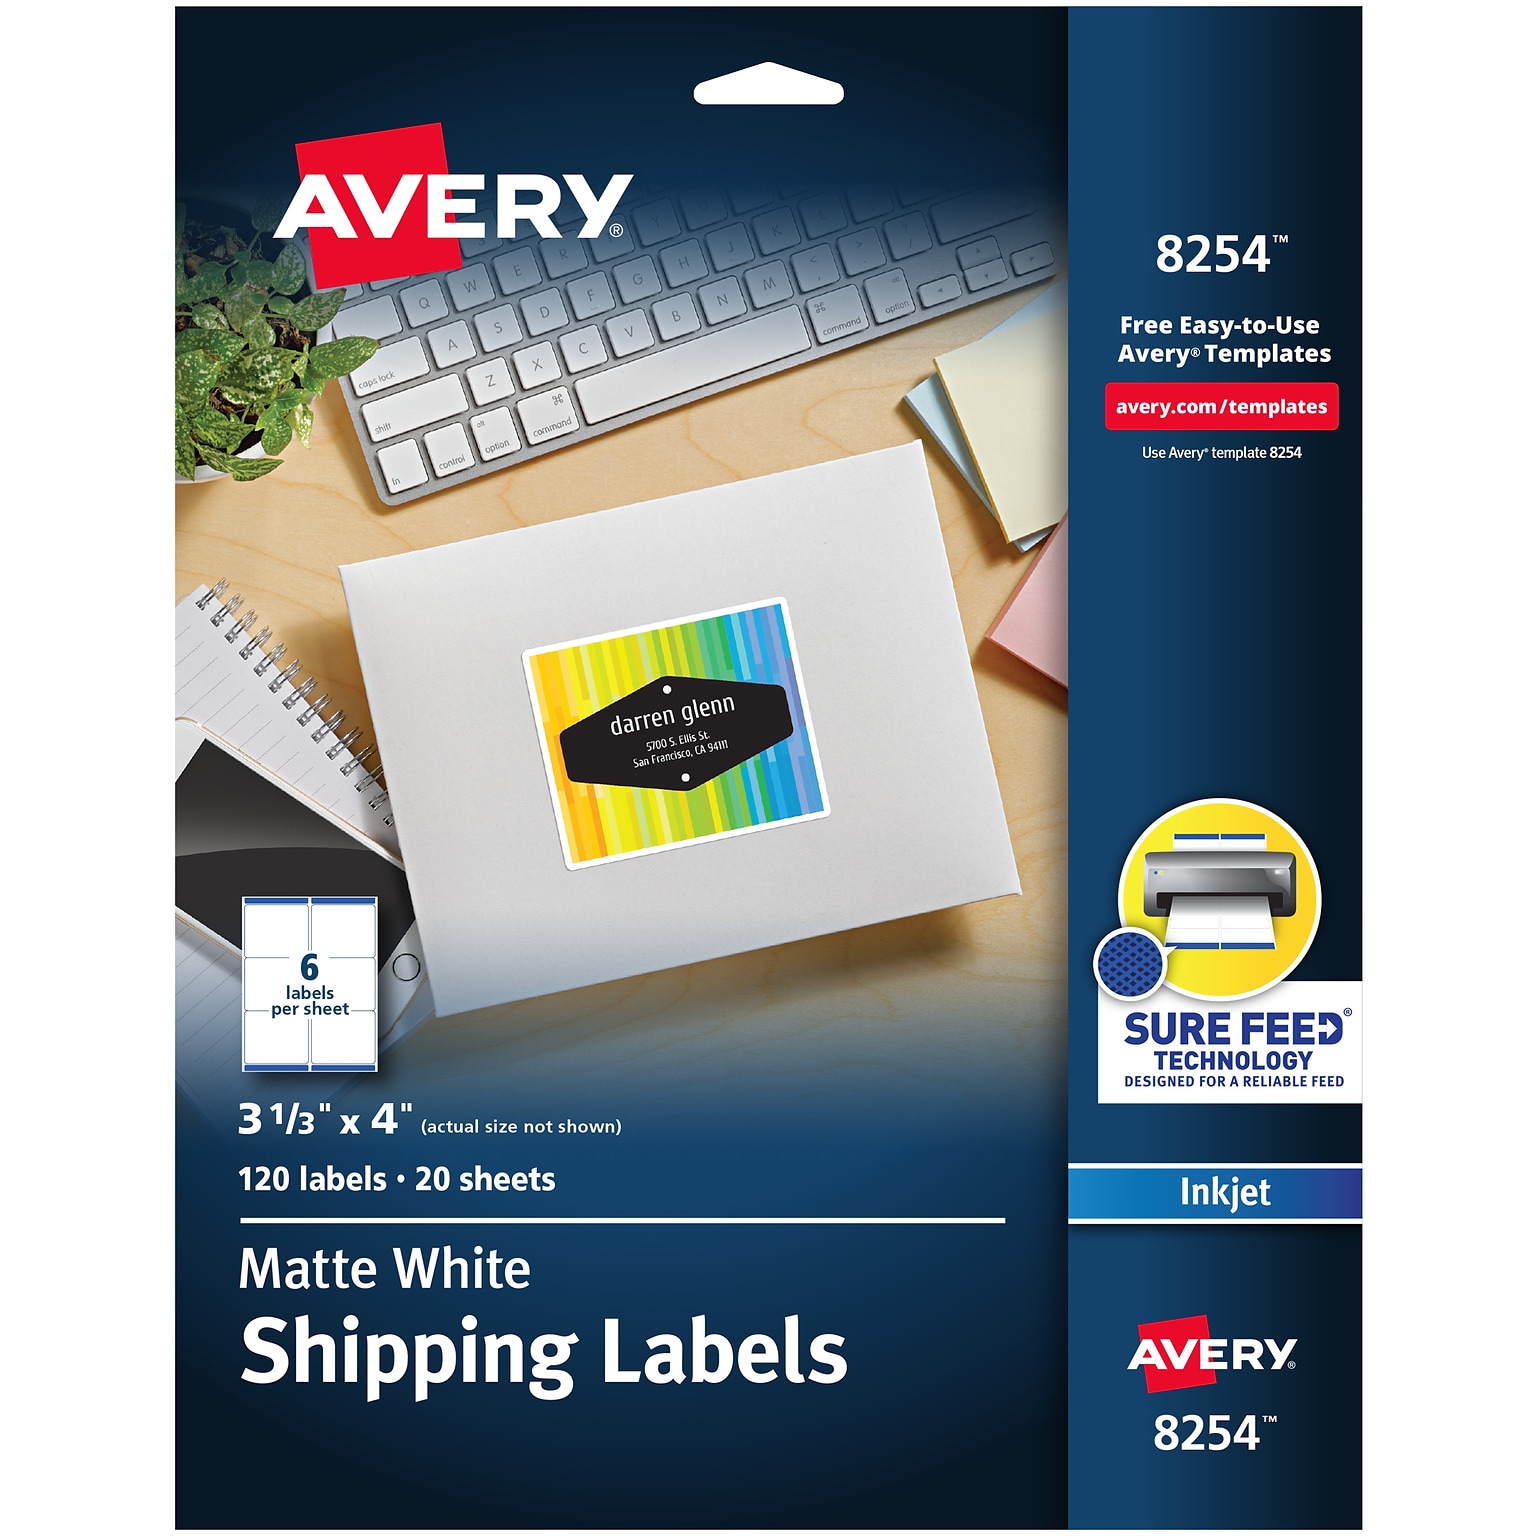 Avery Sure Feed Inkjet Shipping Labels, 3-1/3 x 4, White, 6 Labels/Sheet, 20 Sheets/Pack, 120 Labels/Pack (8254)